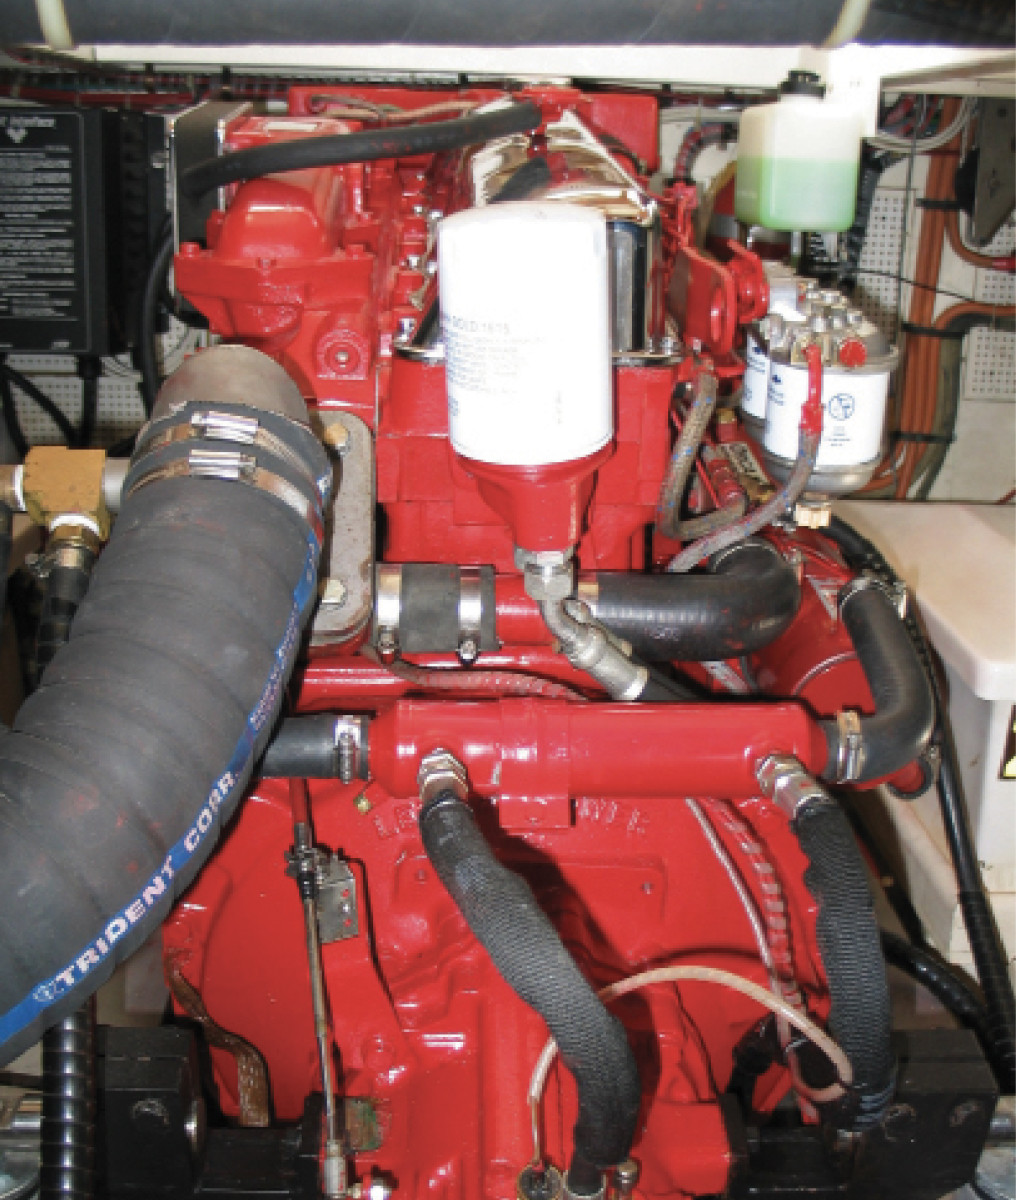 Inspect engine hoses regularly, and, when one needs replacing, don’t recycle hose clamps.